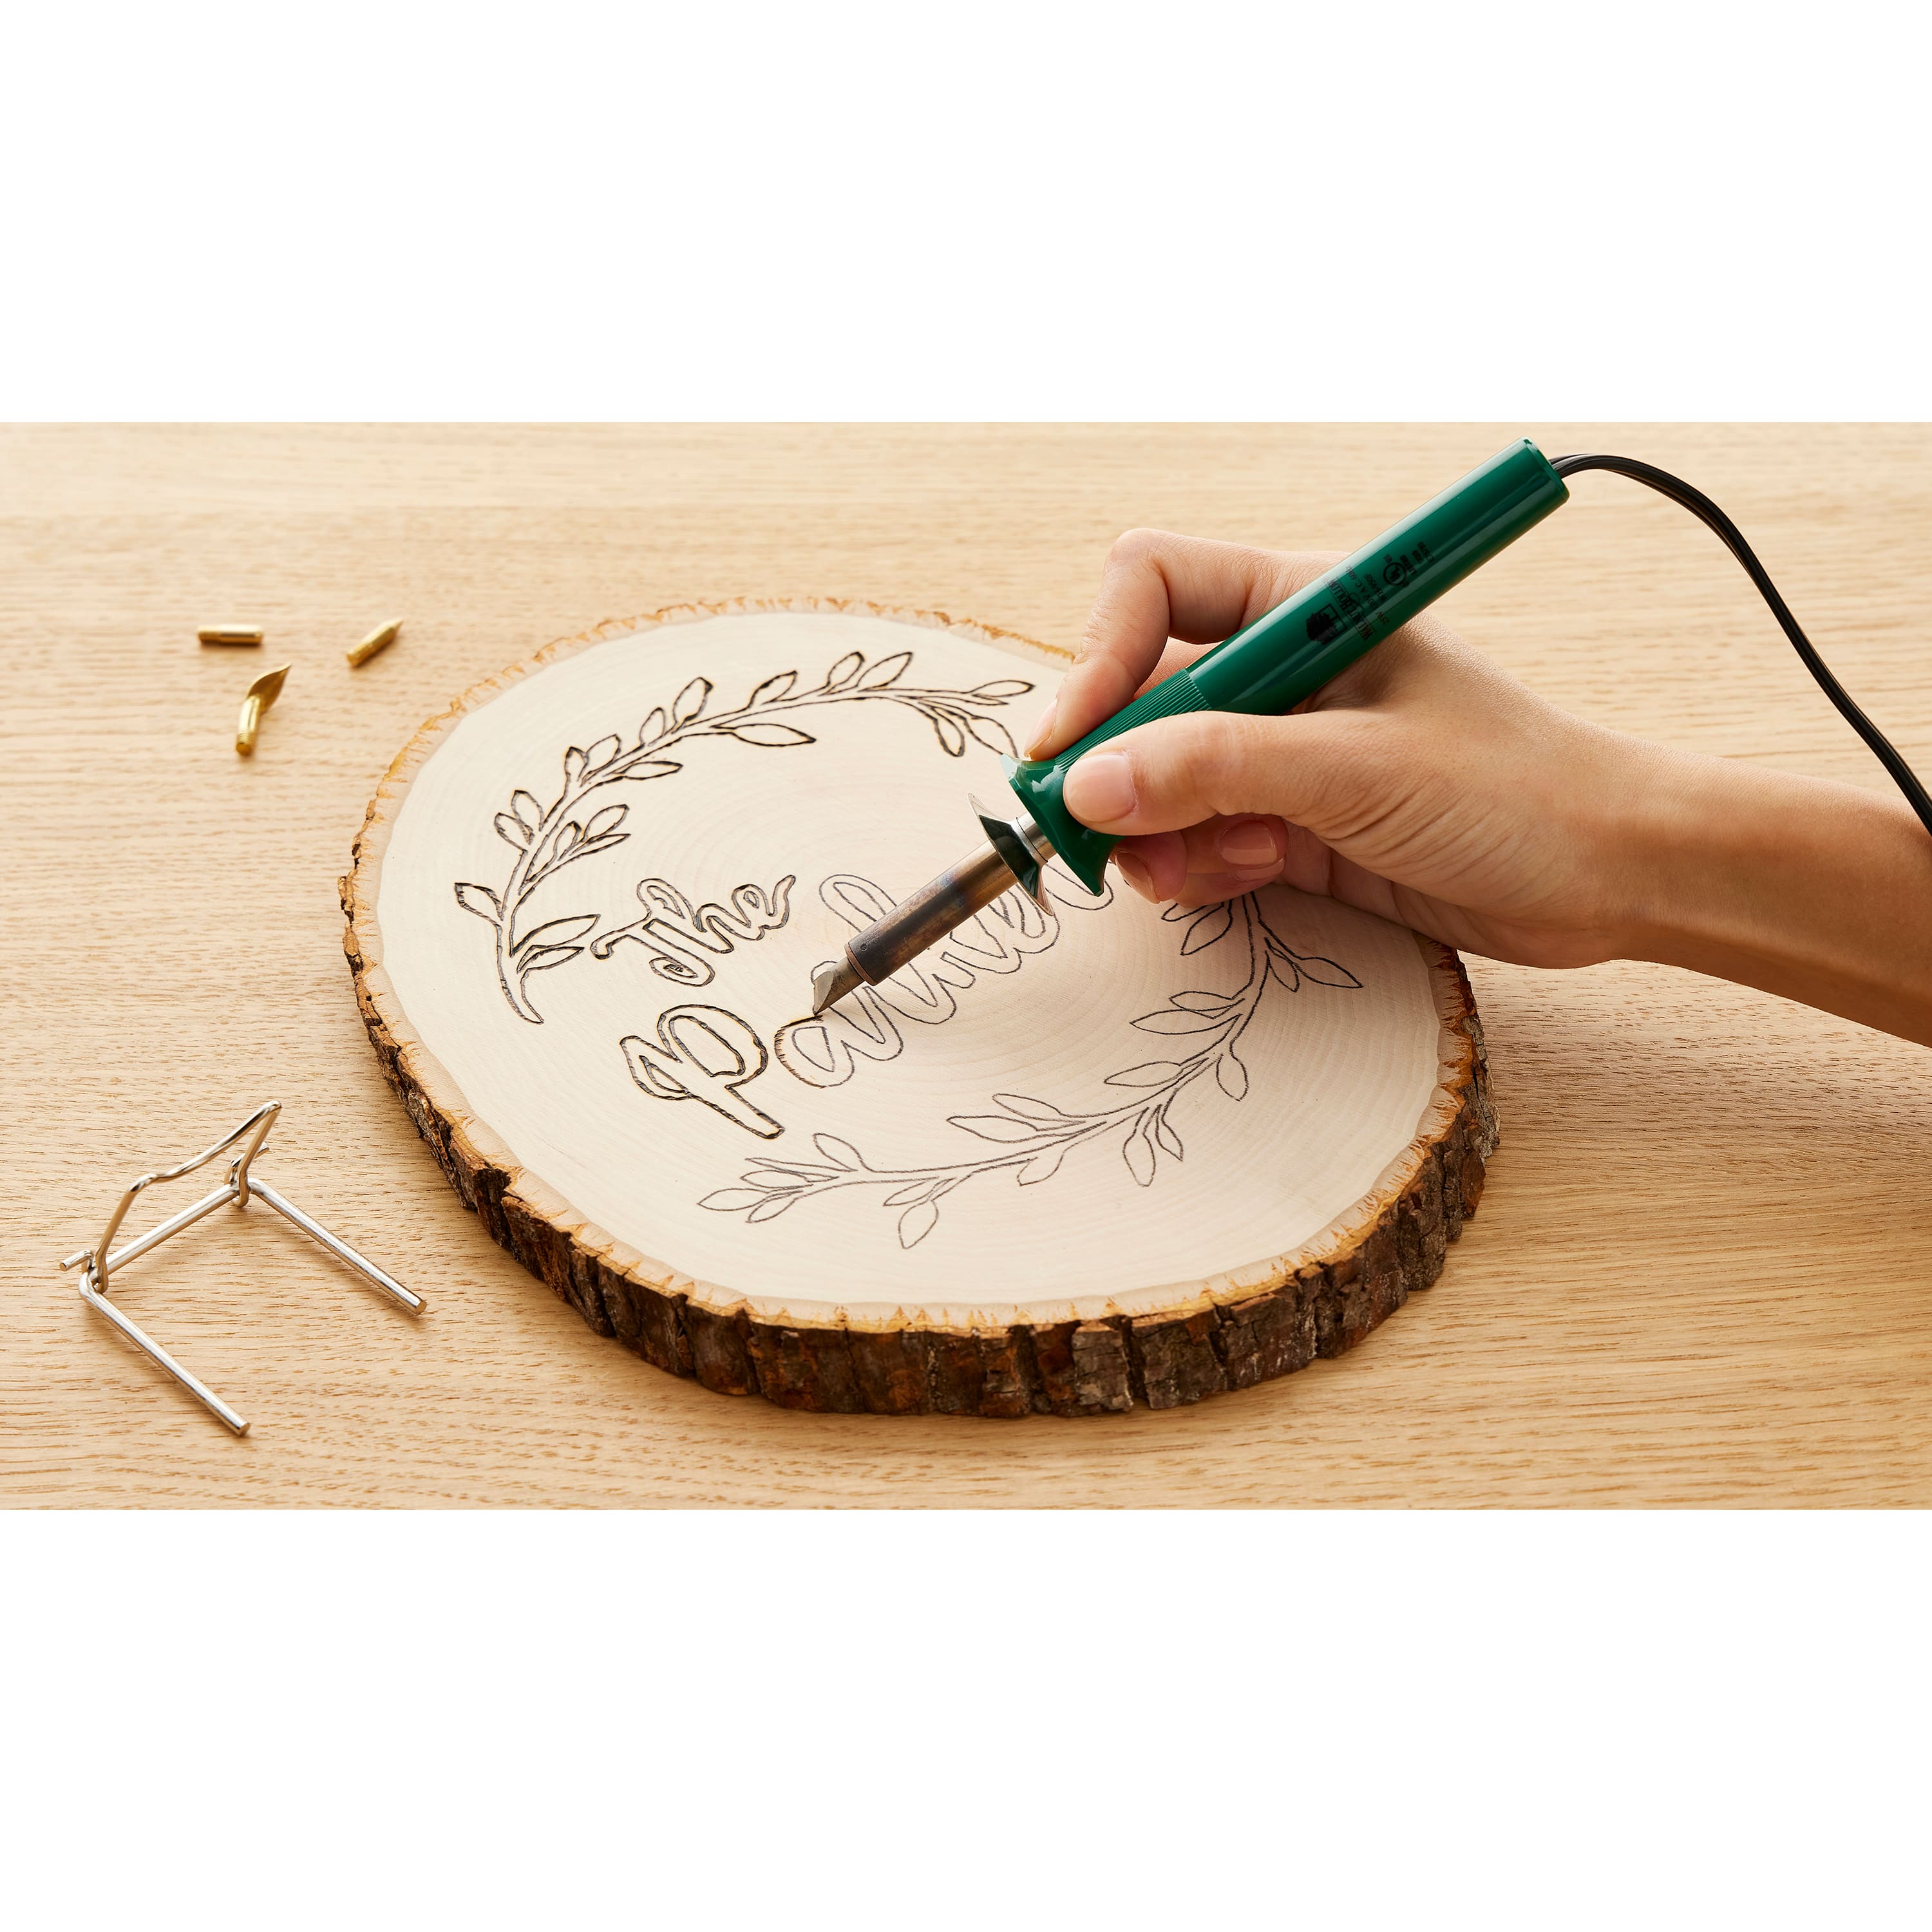  Wood Burning Kit for Beginners, 73PCS Professional Wood Burning  Pen and Accessories Wooden Kits Embossing Carving and Wood Burning